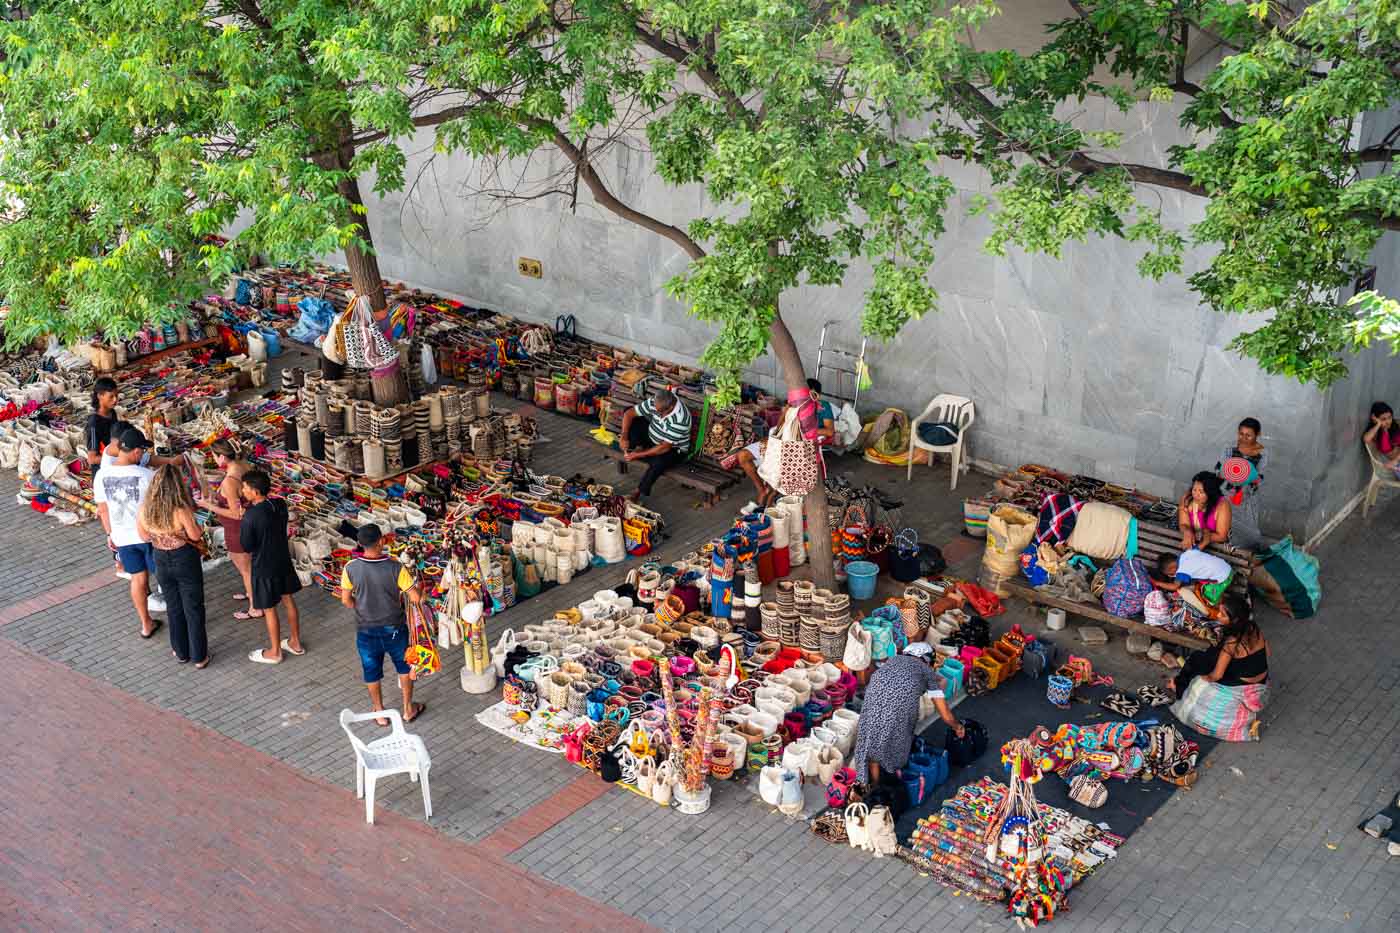 Overlooking a souvenir market with colorful, handmade products covered by green trees in Santa Marta historic center.